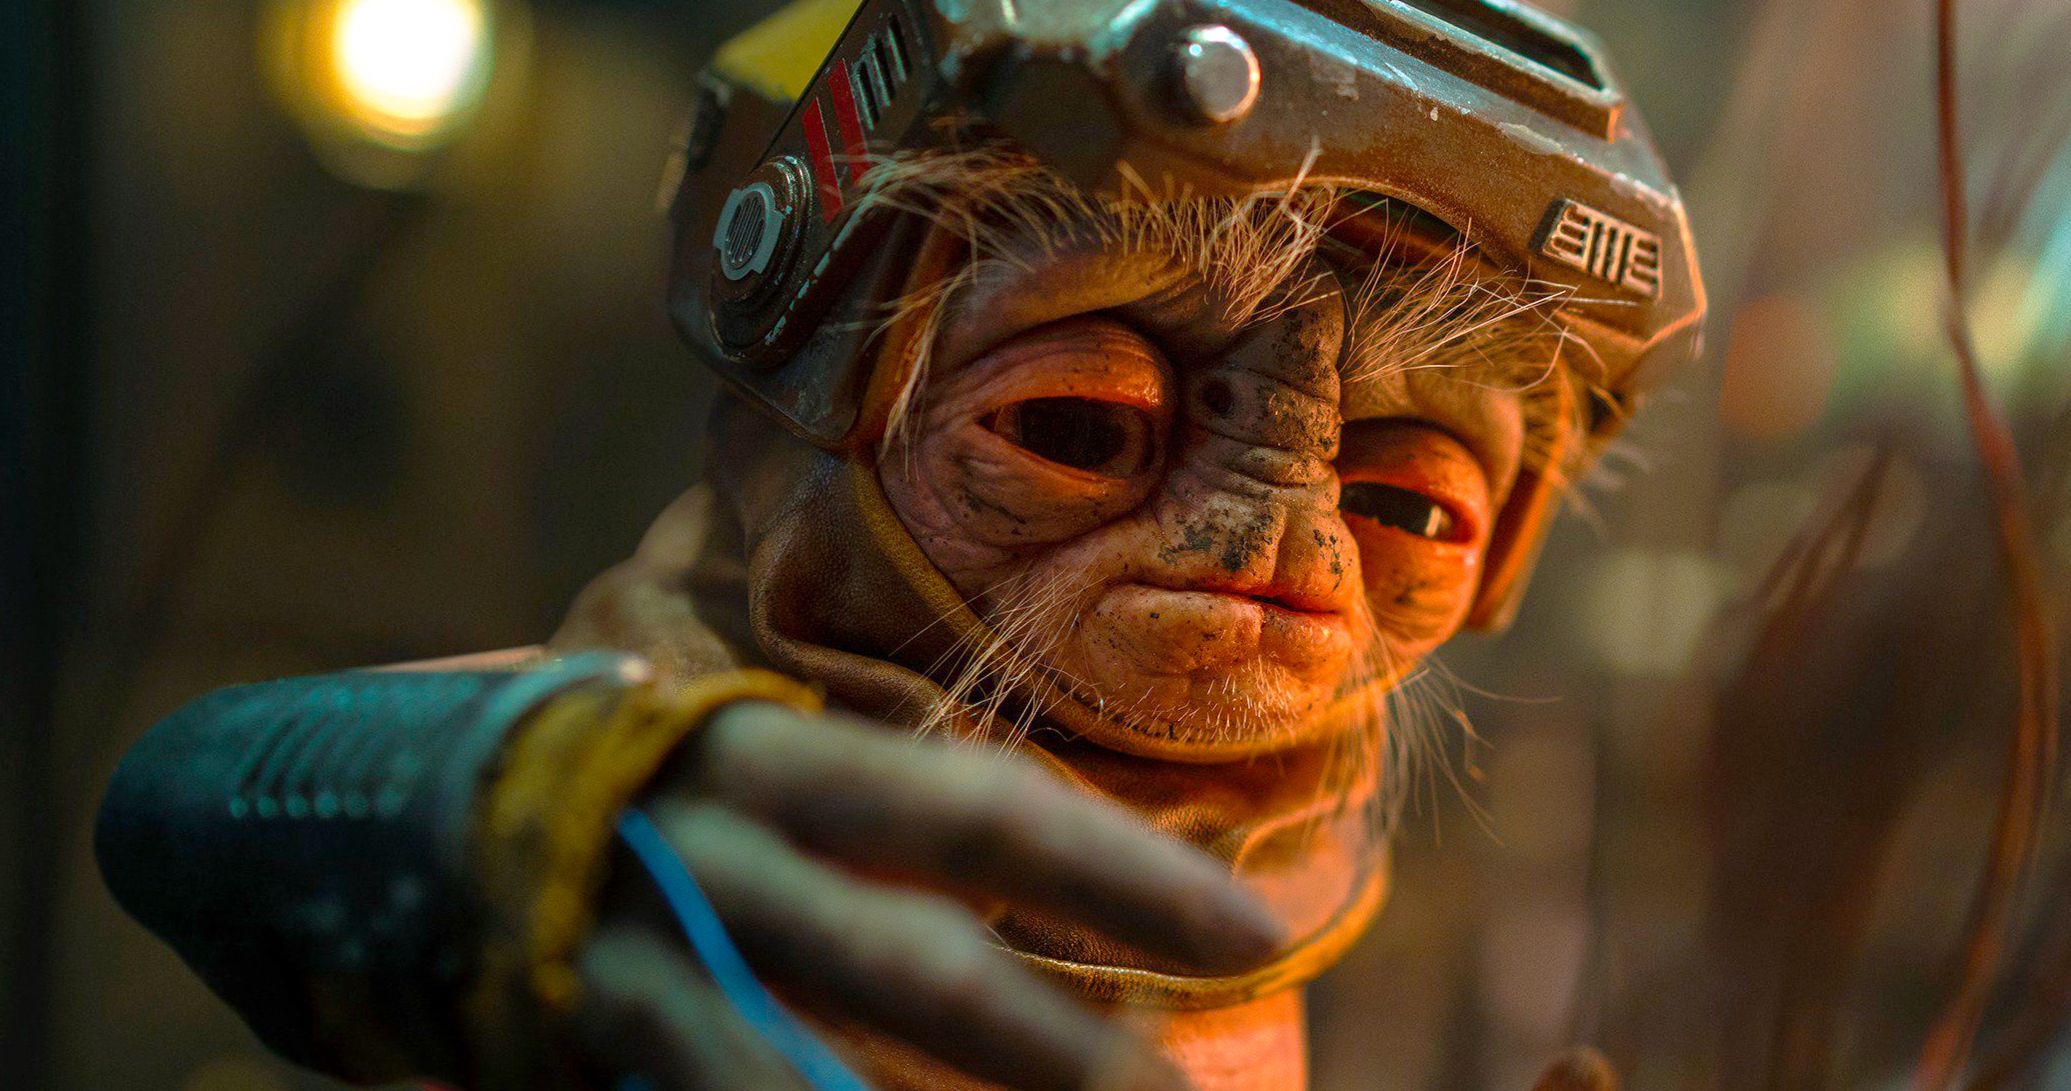 Star Wars 9 Photo Introduces Droidsmith Babu Frik, Is He Behind C-3PO's Red Eyes?